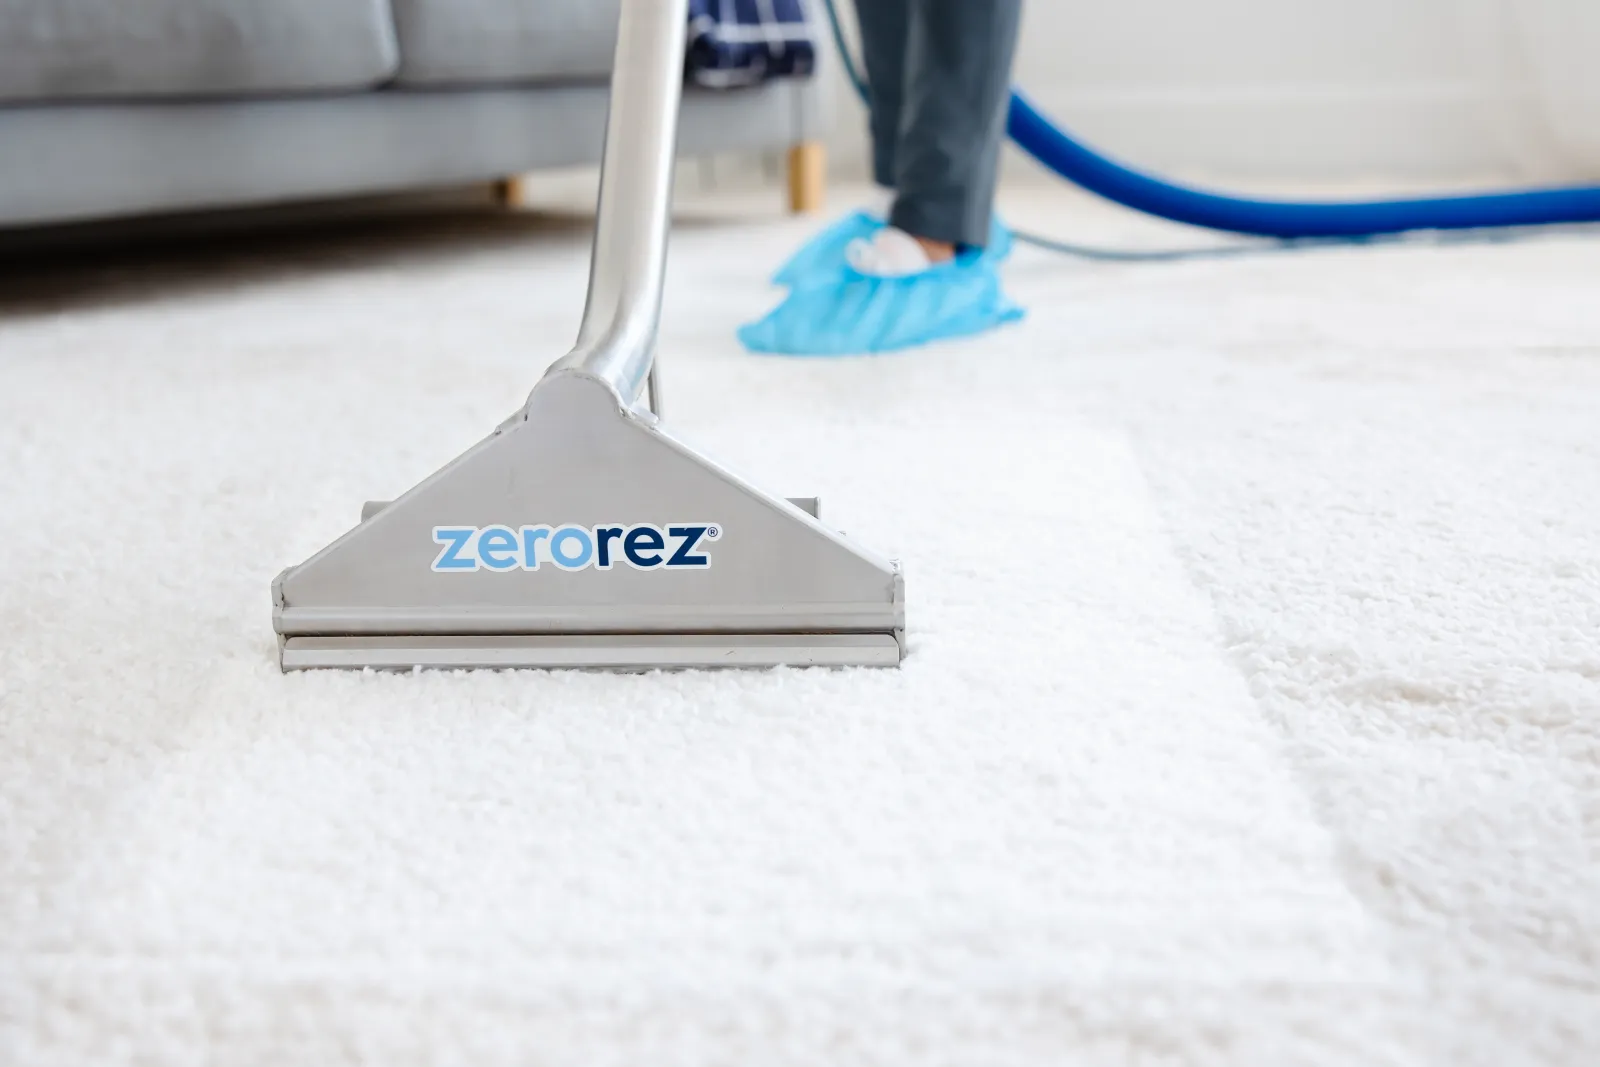 Zerorez Zr Wand deep cleaning a white carpet to extract all the particles vacuuming leaves behind